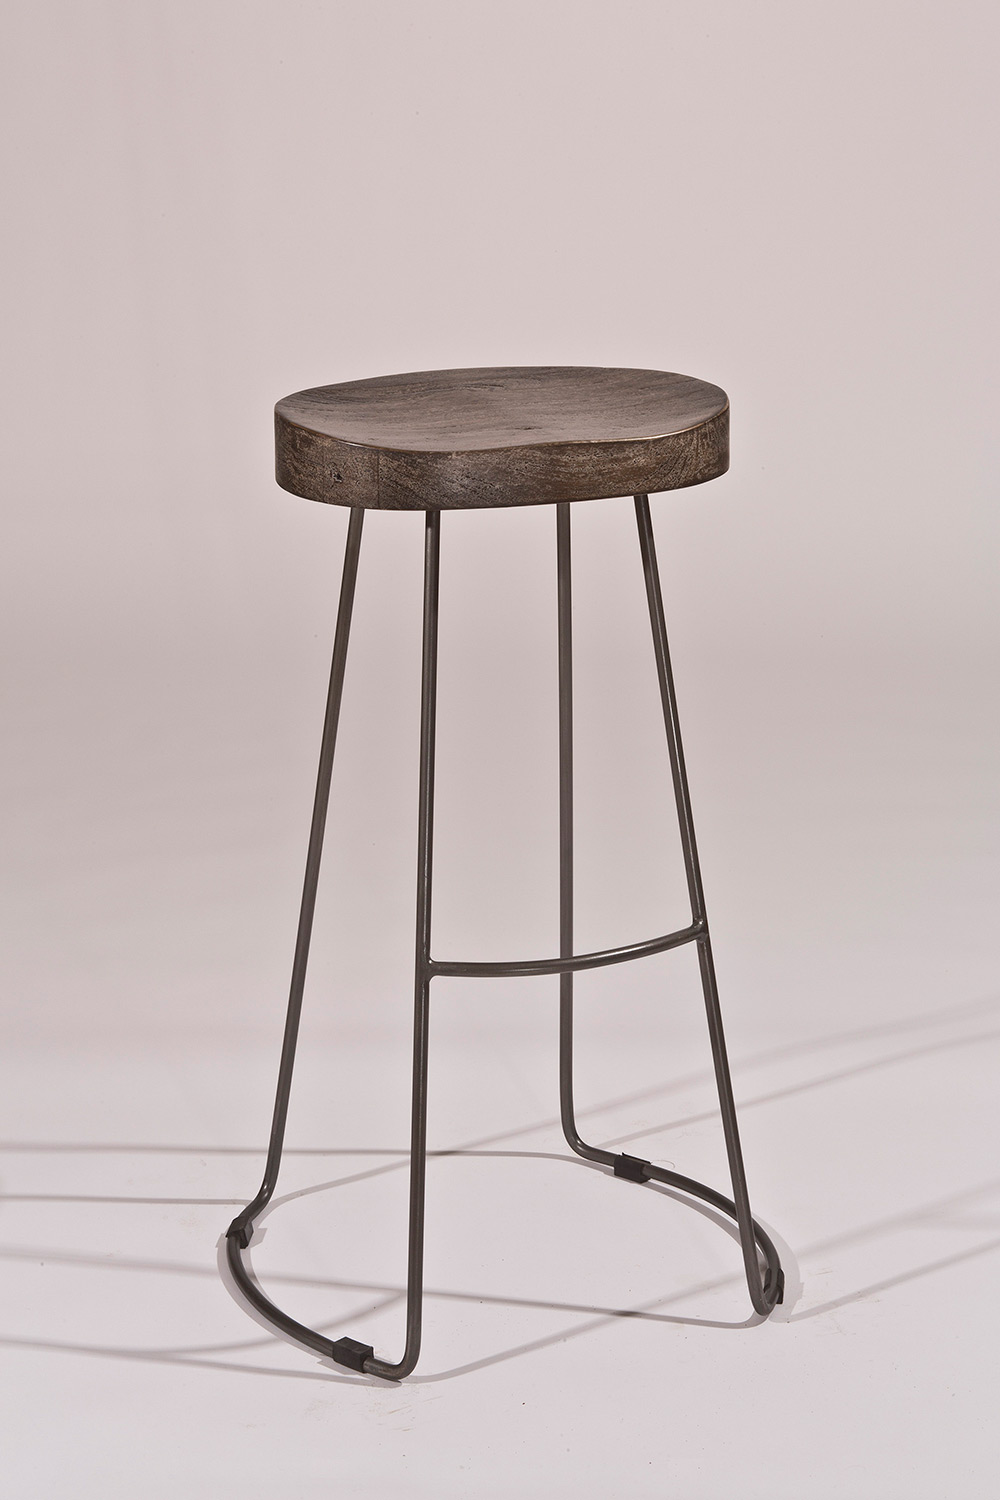 Hillsdale Hobbs Tractor Non-Swivel Bar Stool - Distressed Black/Pewter